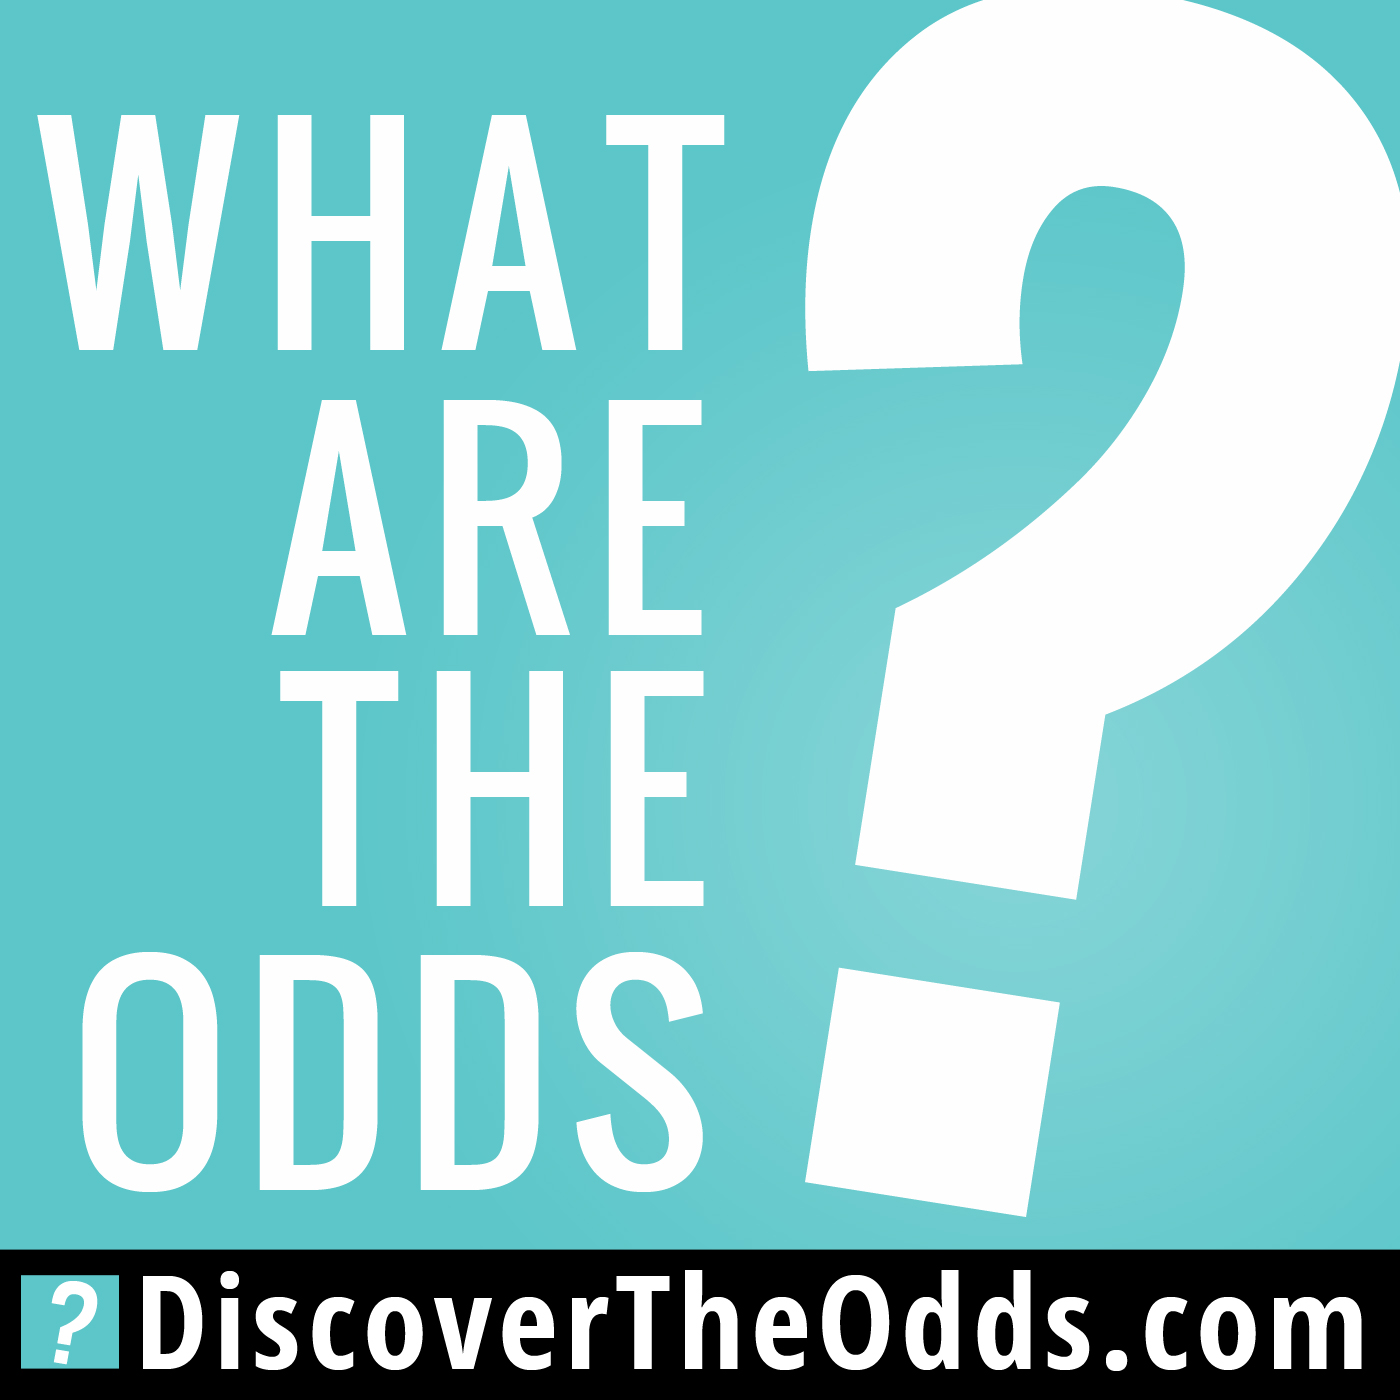 Introducing the "What are the Odds?" Podcast